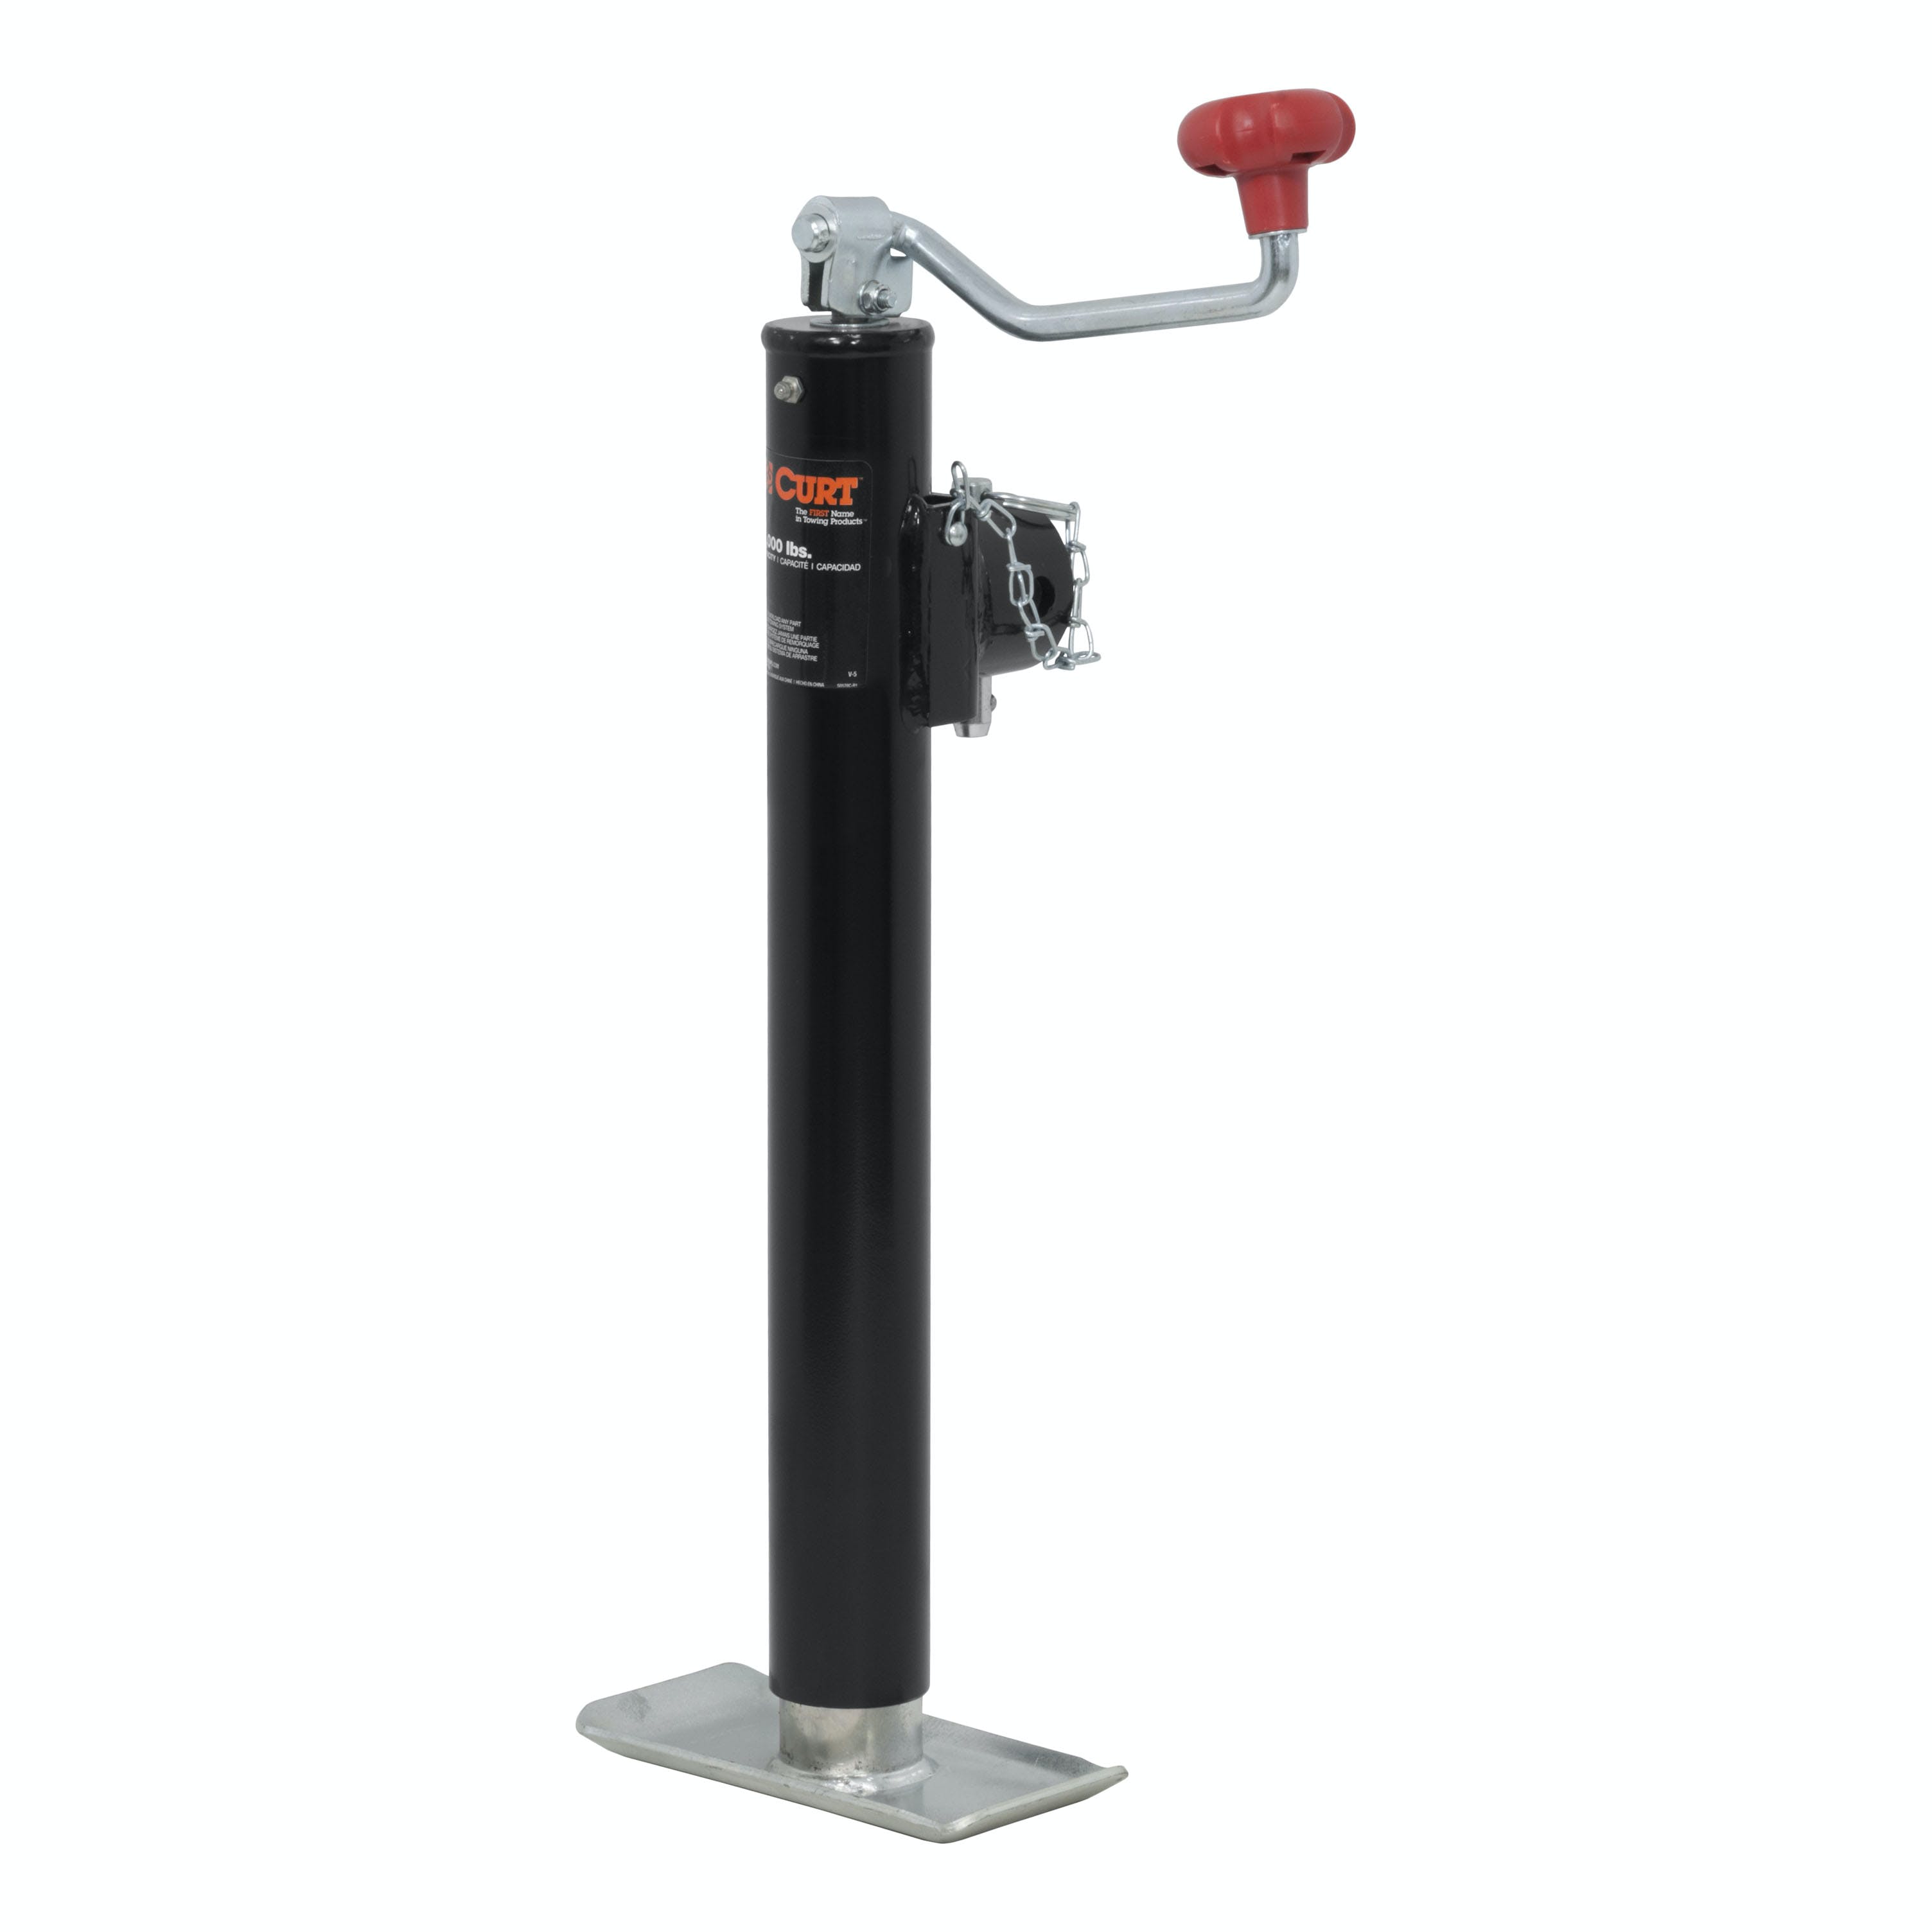 CURT 28356 Pipe-Mount Swivel Jack with Top Handle (5,000 lbs, 15 Travel)